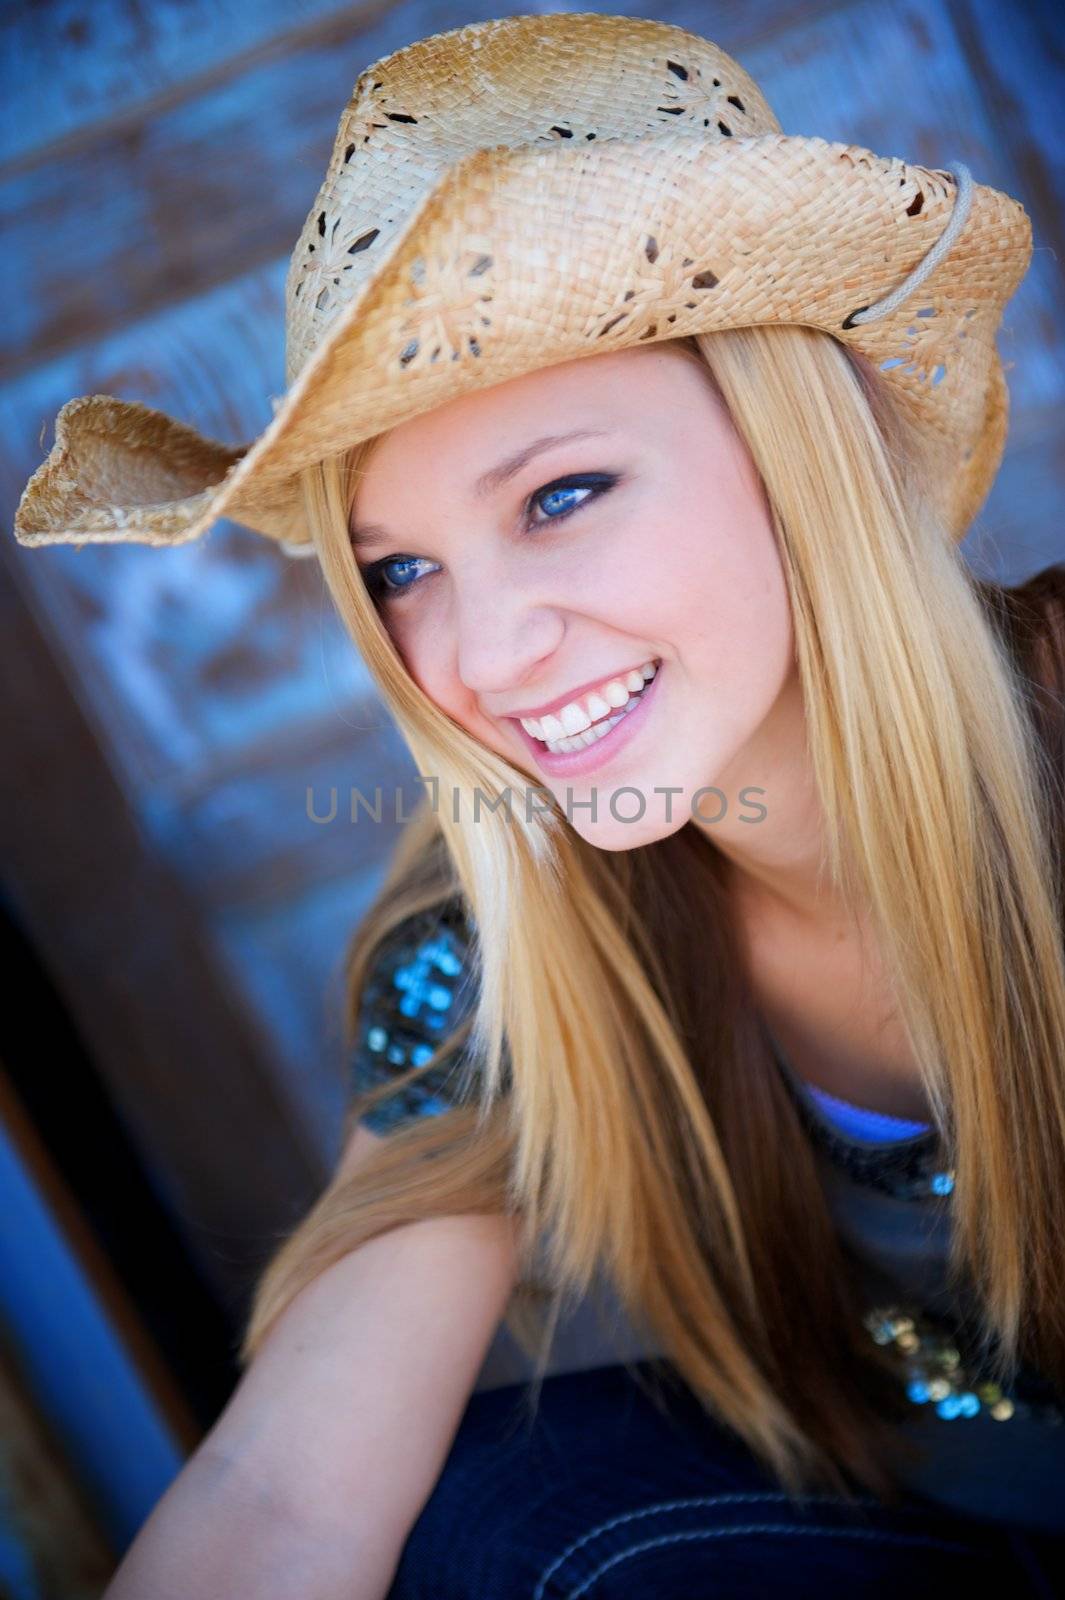 Attractive Blond Model Smiles While Wearing Cowboy Hat by pixelsnap